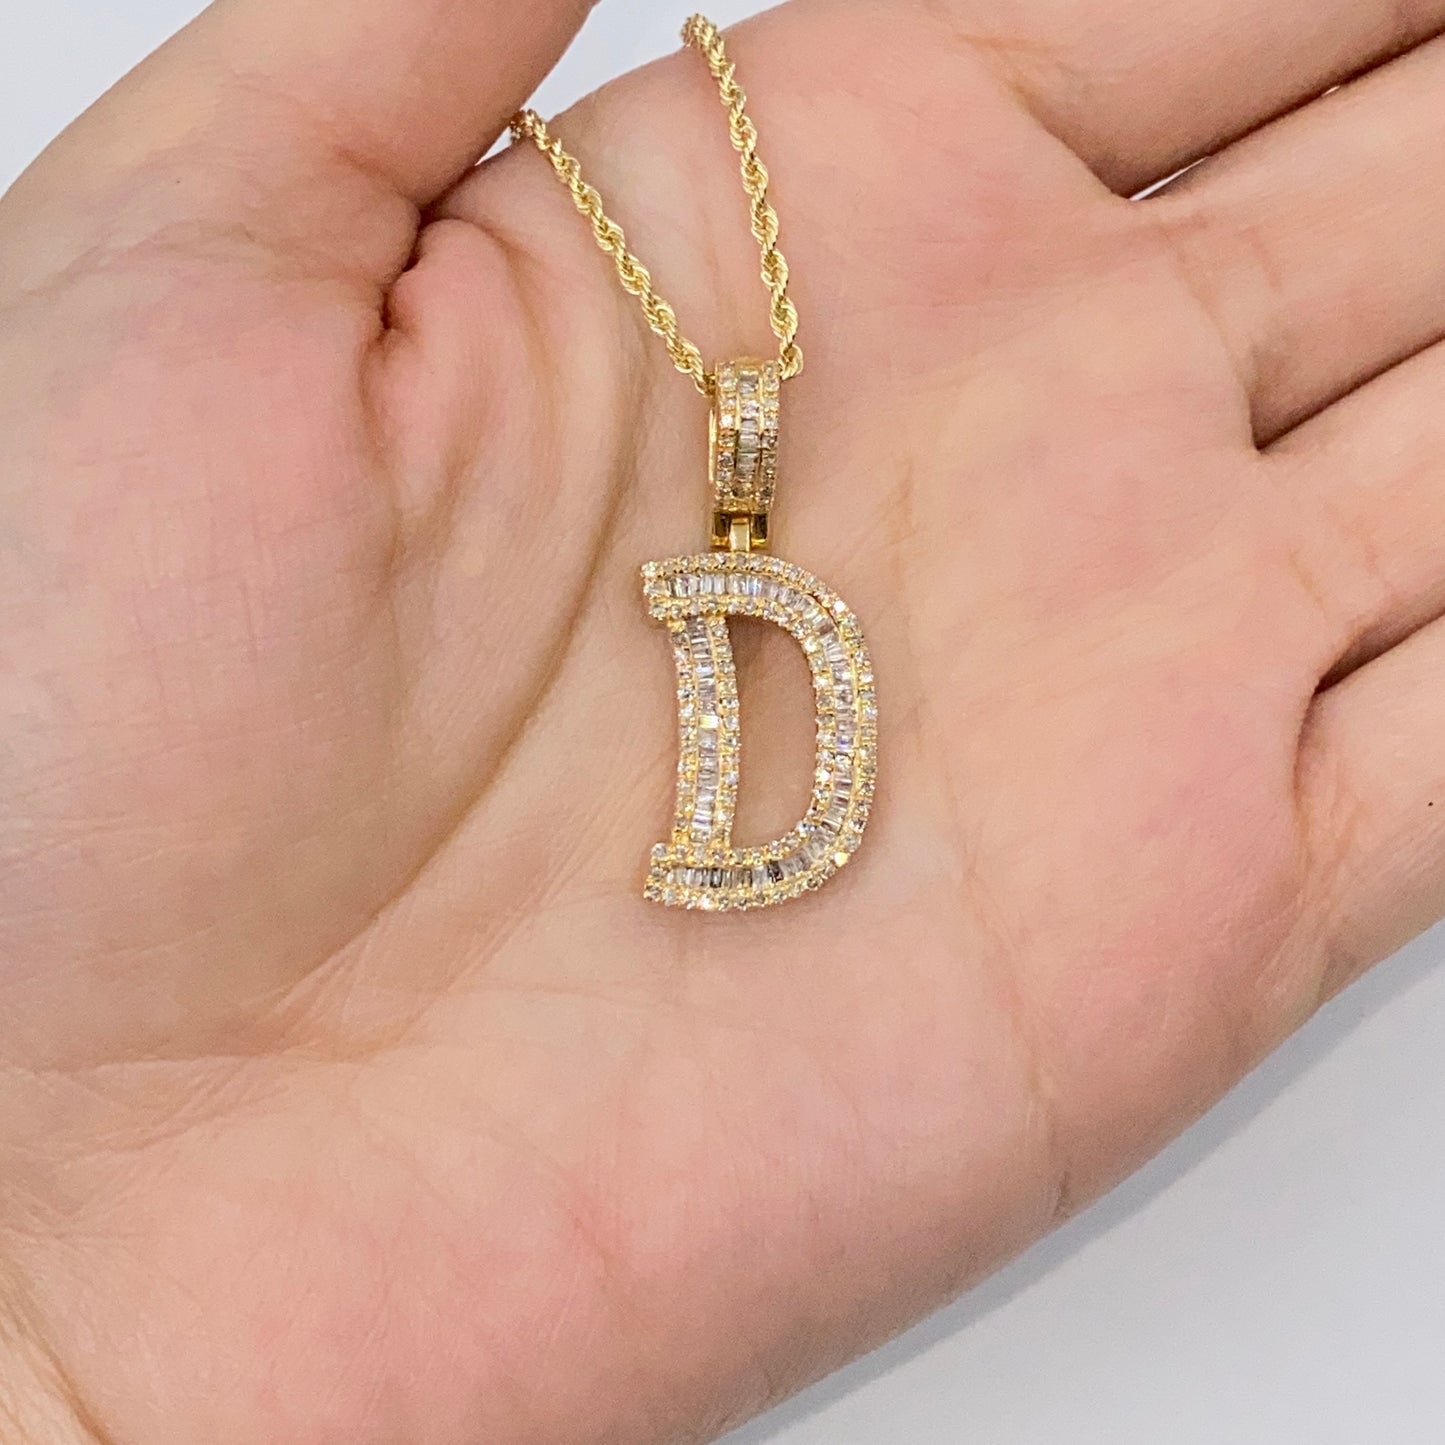 SPECIAL OFFER 14K Initials with Chain Included!